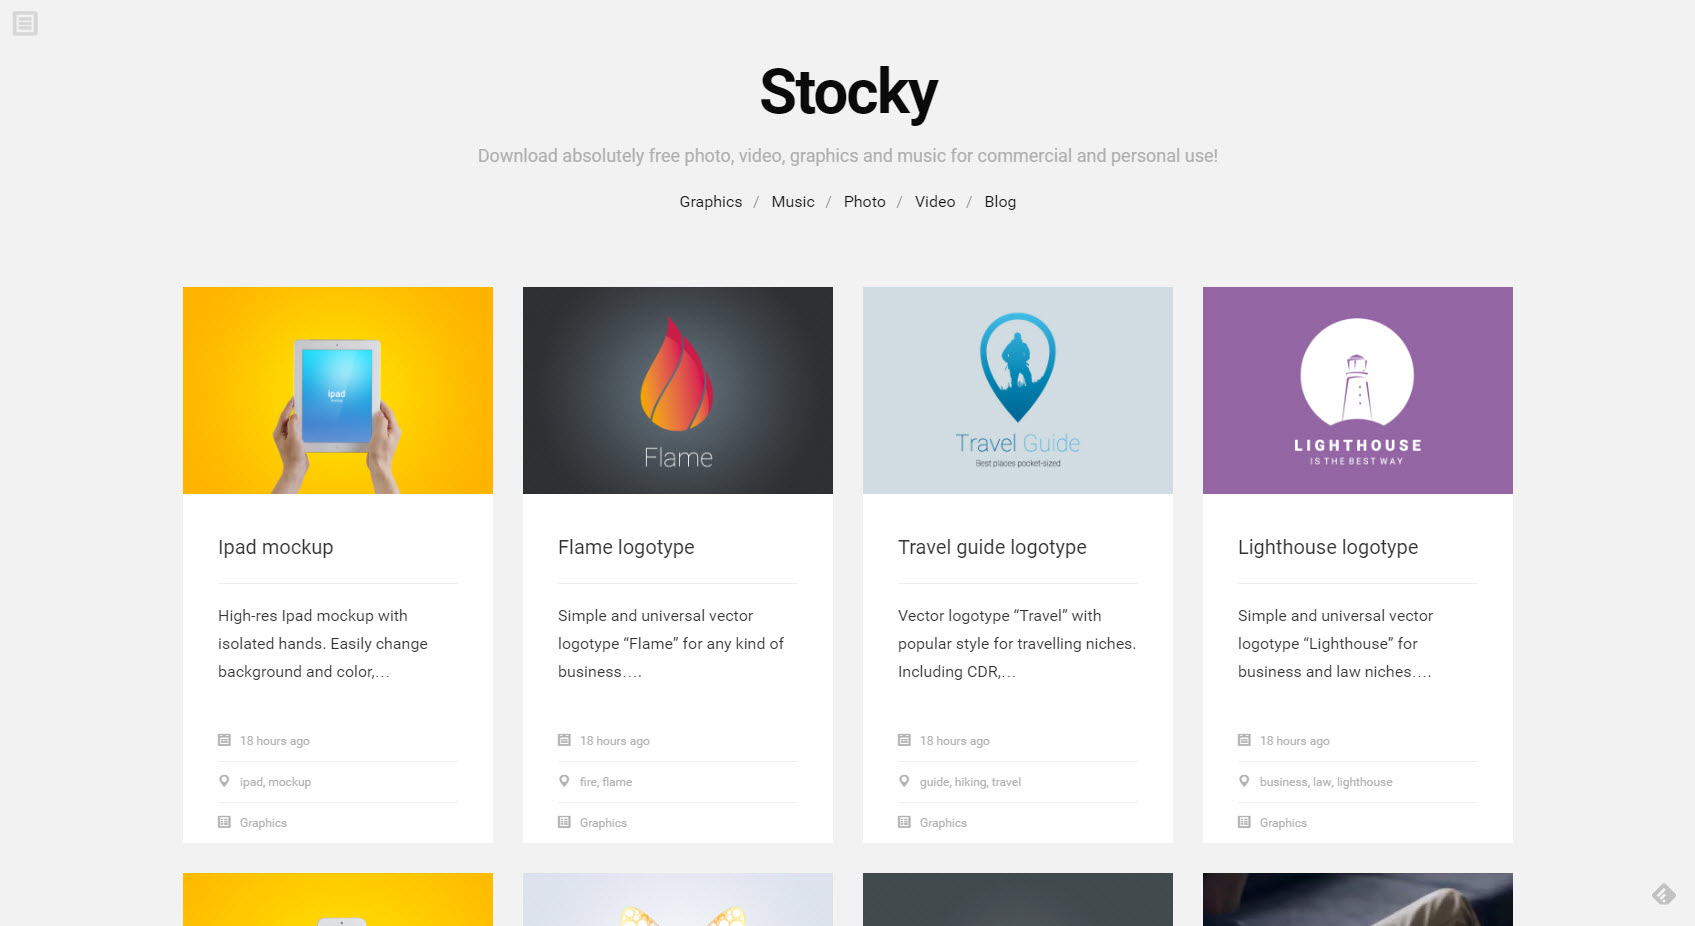 Stocky.pro: the Rather Plain, but Appropriate Landing Page